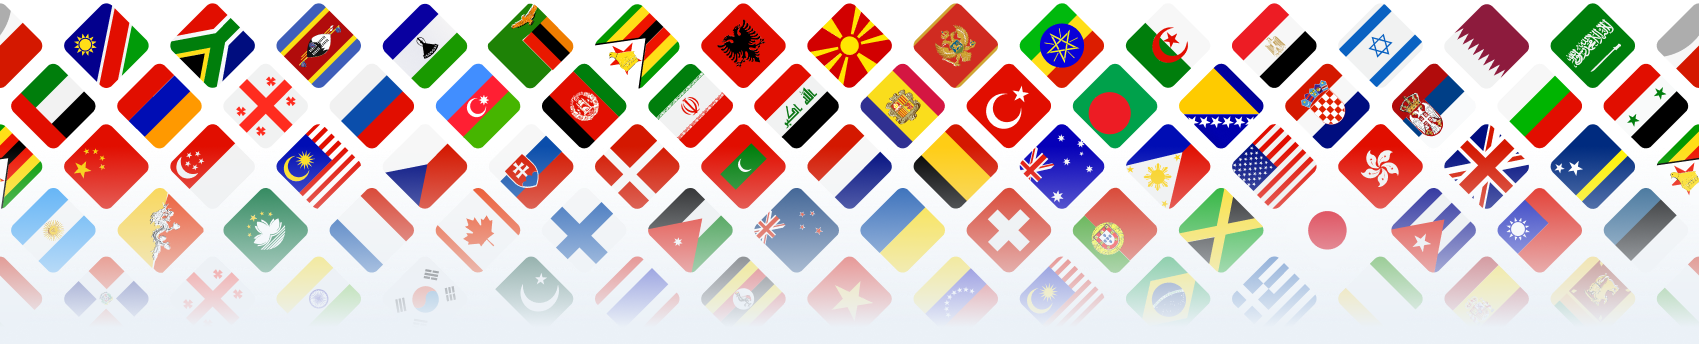 Country flags image